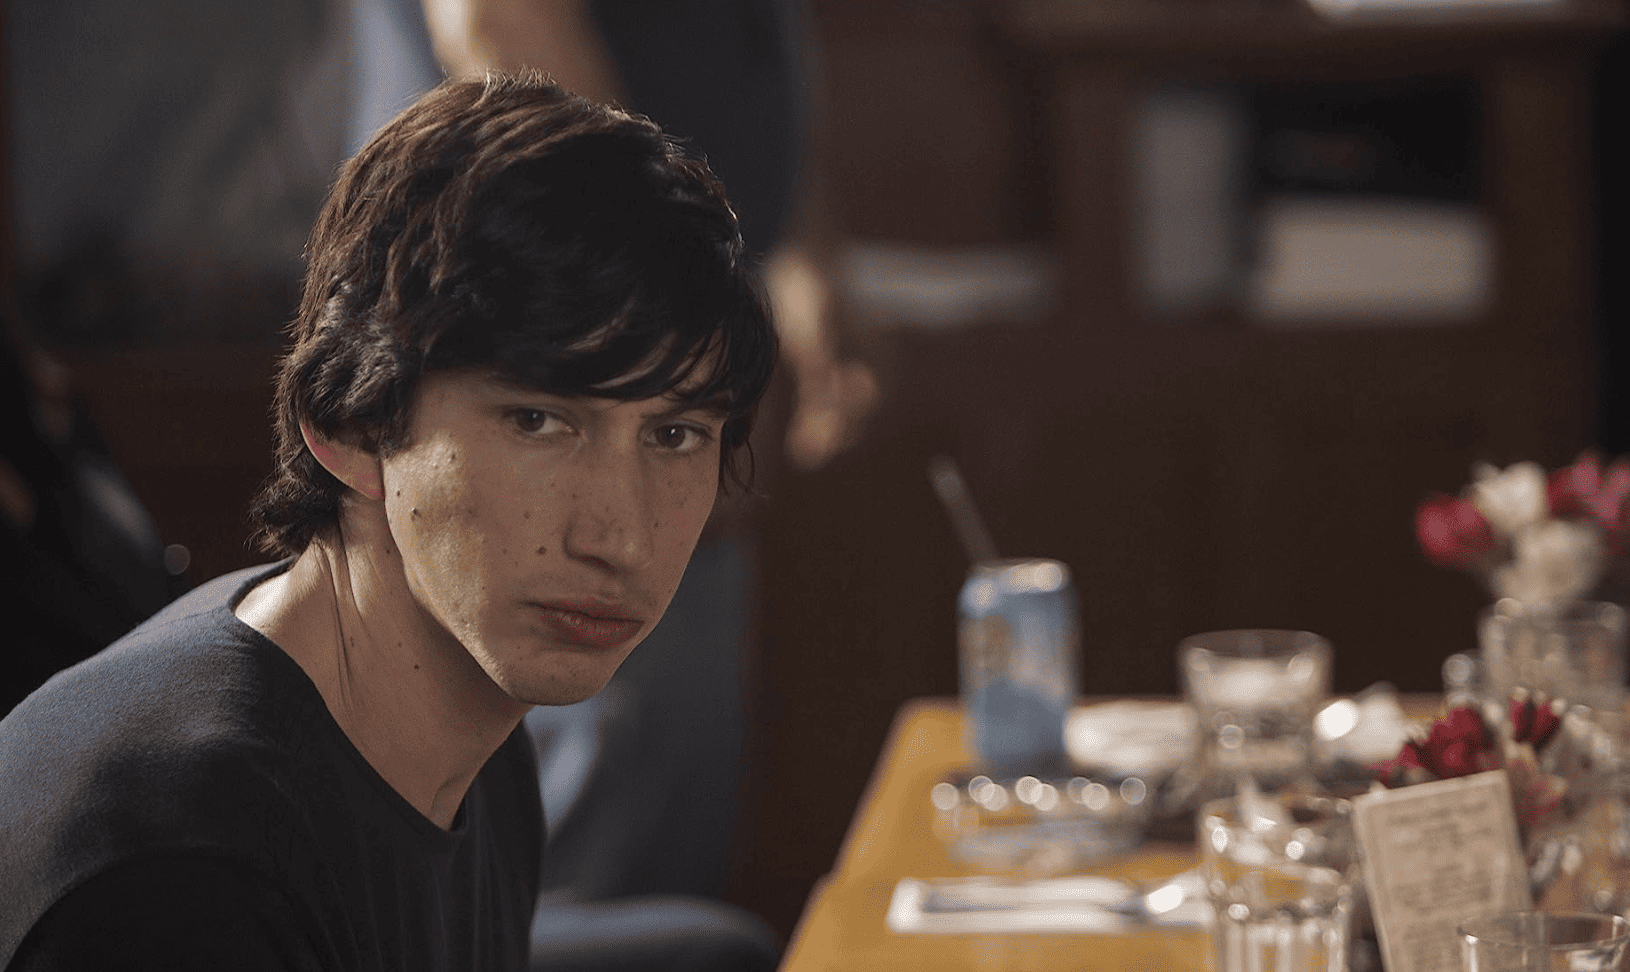 Adam Driver staring silently into the distance in this image from Apatow Productions